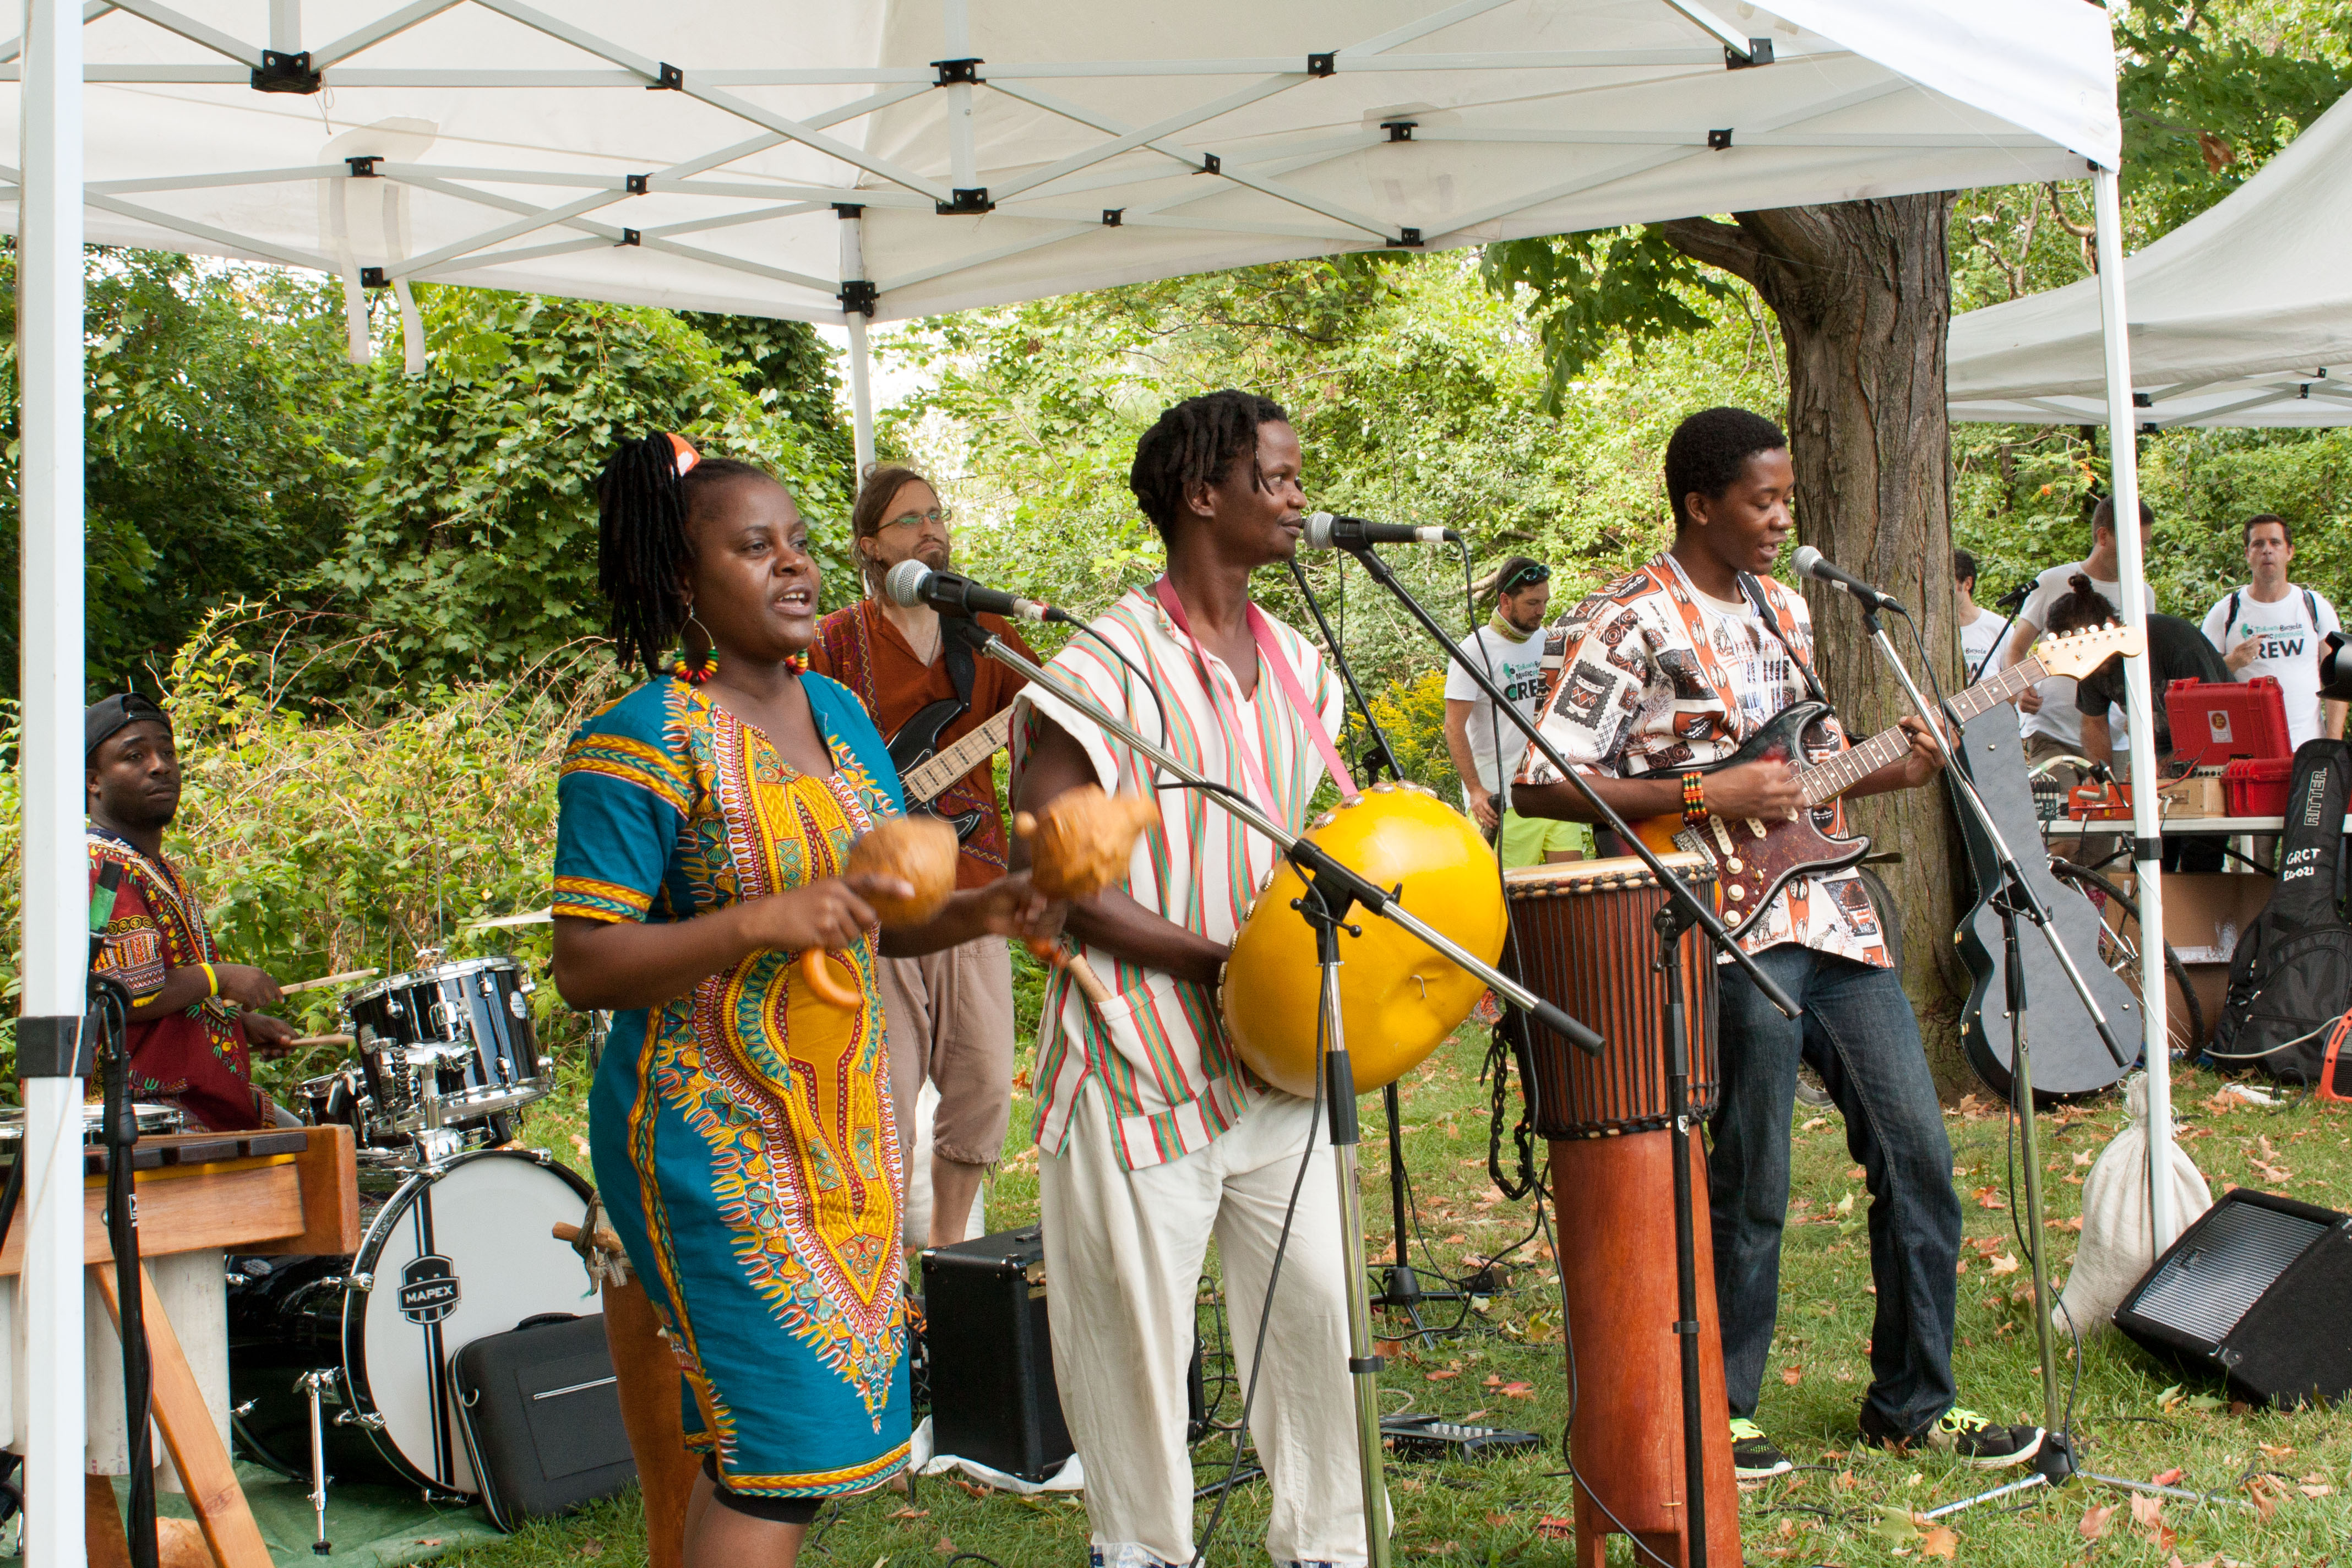 Image description: three musicians play percussion instruments and sing under a tent.